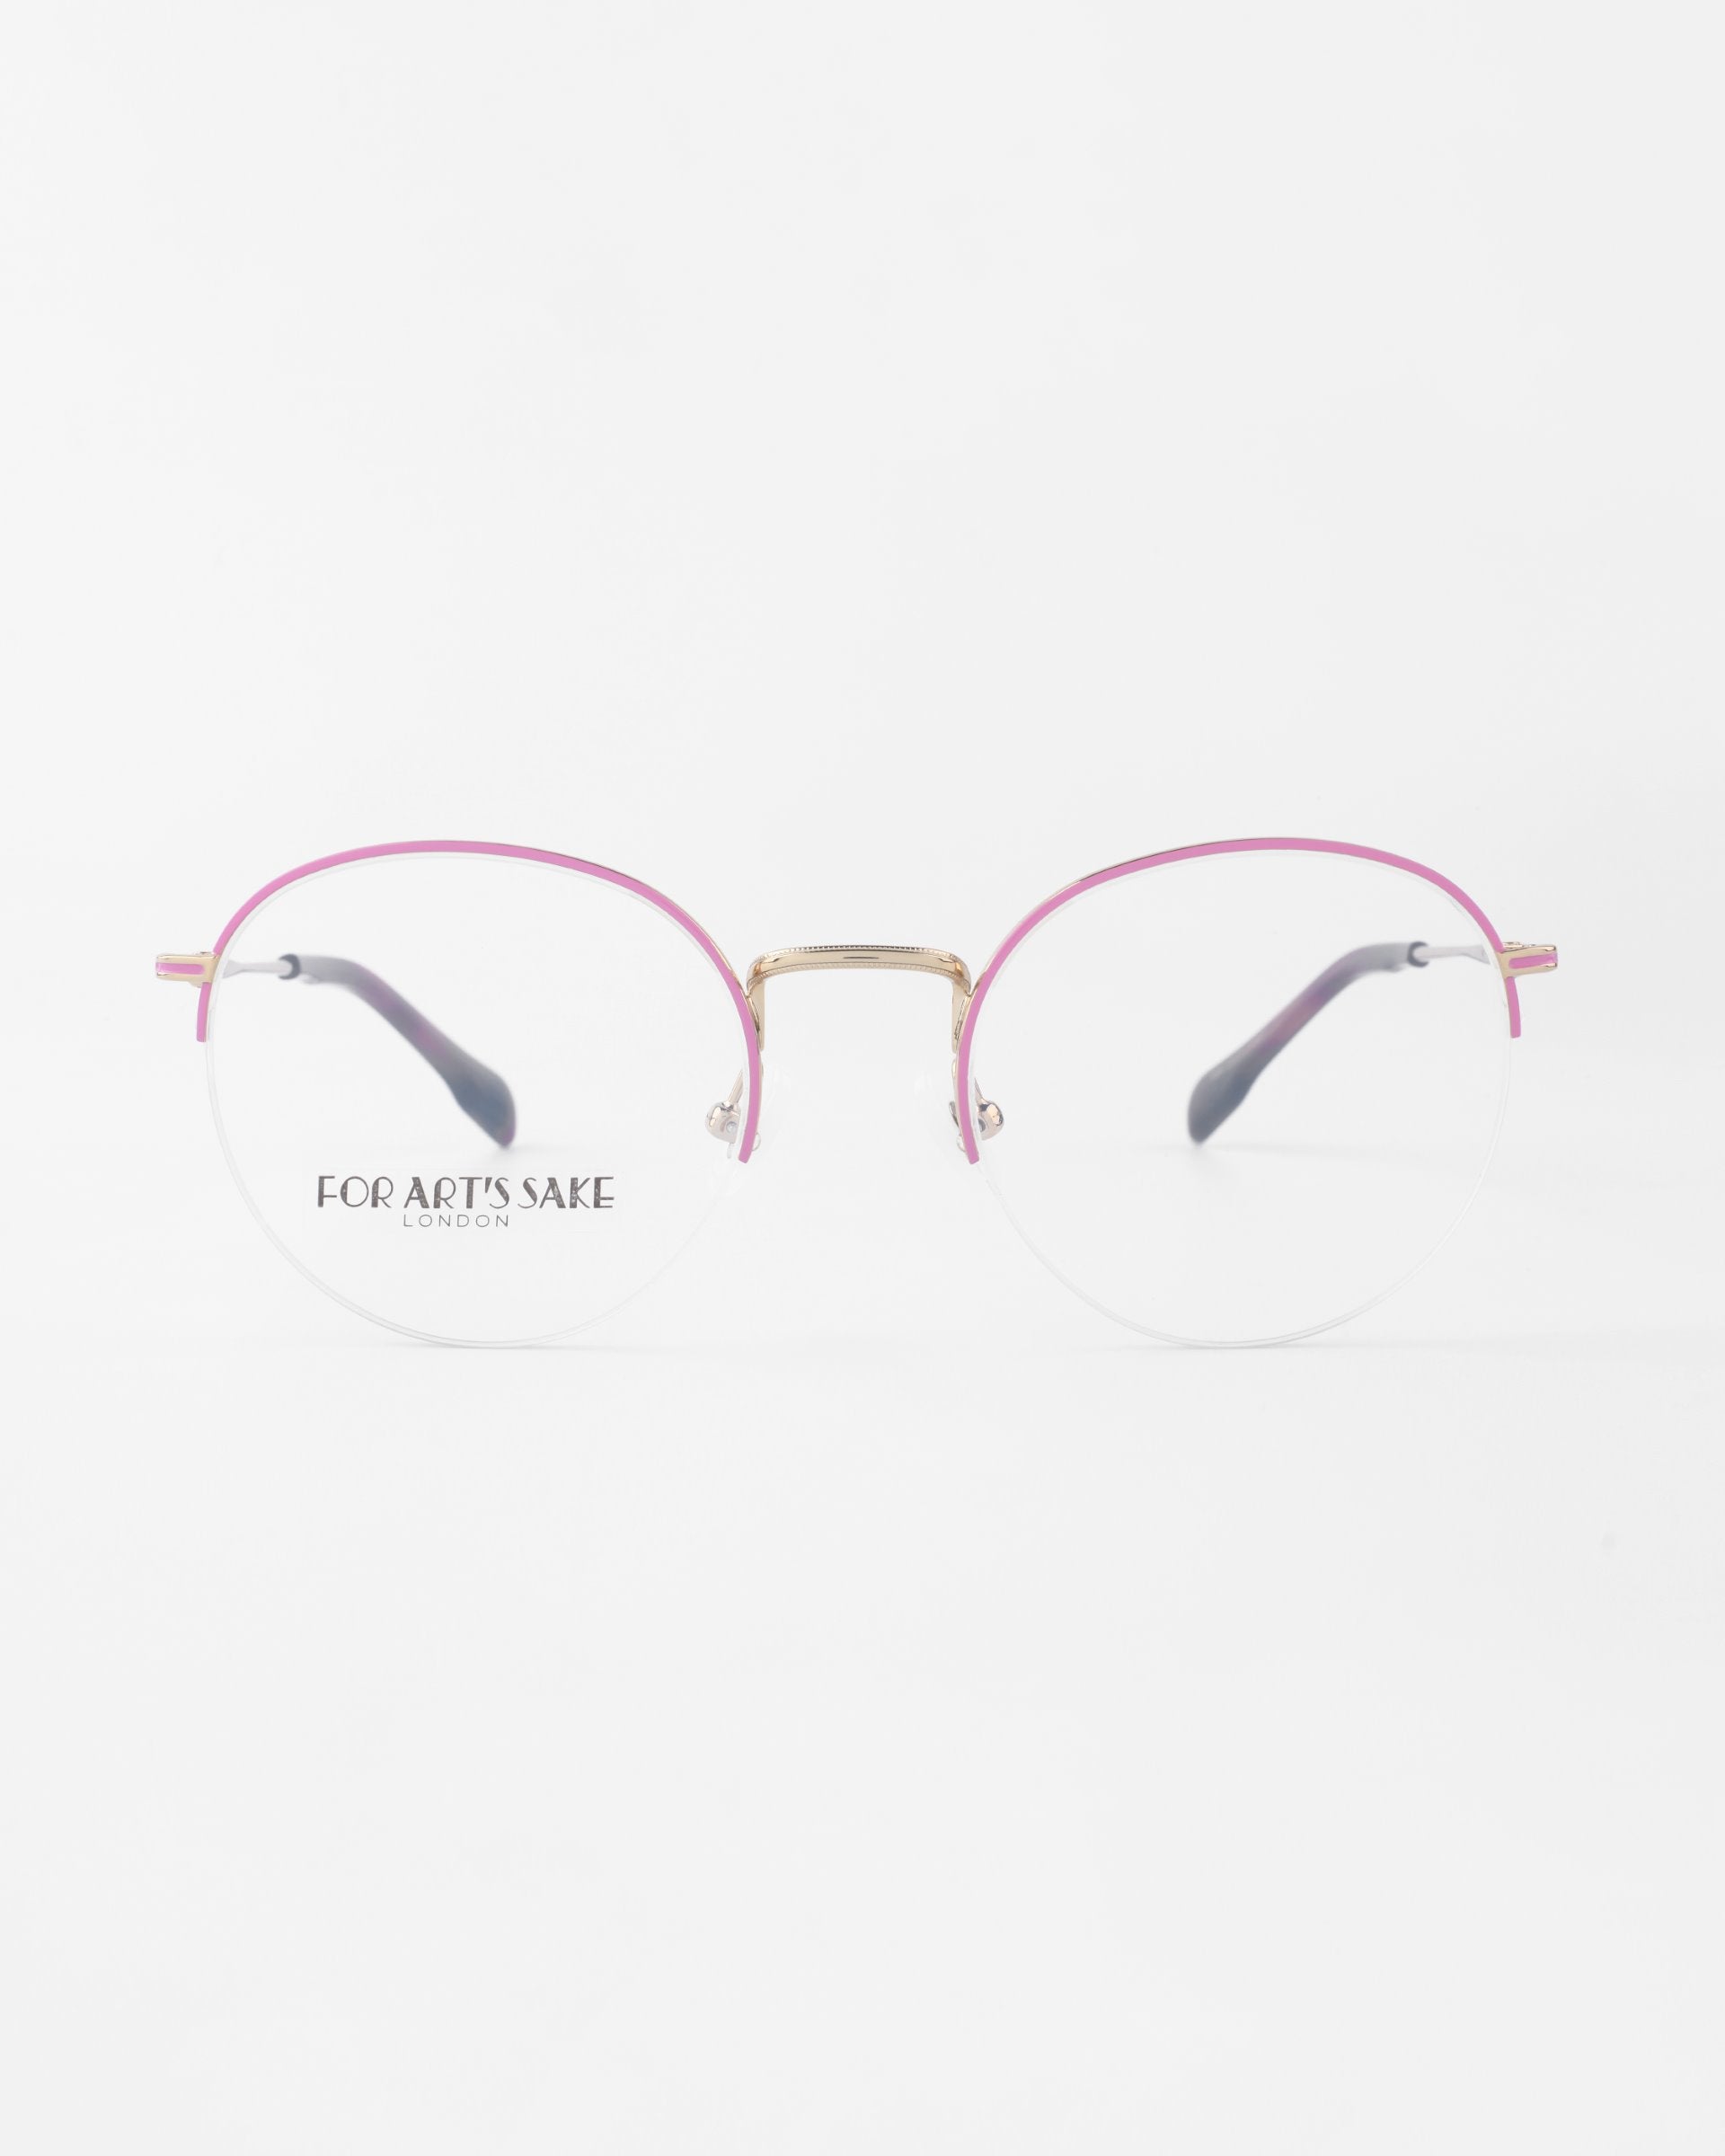 A pair of Ivy reading glasses by For Art&#39;s Sake® with a thin gold bridge and pink rims. The earpieces are black with gold accents near the hinges. Featuring blue light filter lenses, the words &quot;For Art&#39;s Sake® London&quot; are printed on the left lens. The background is plain white.